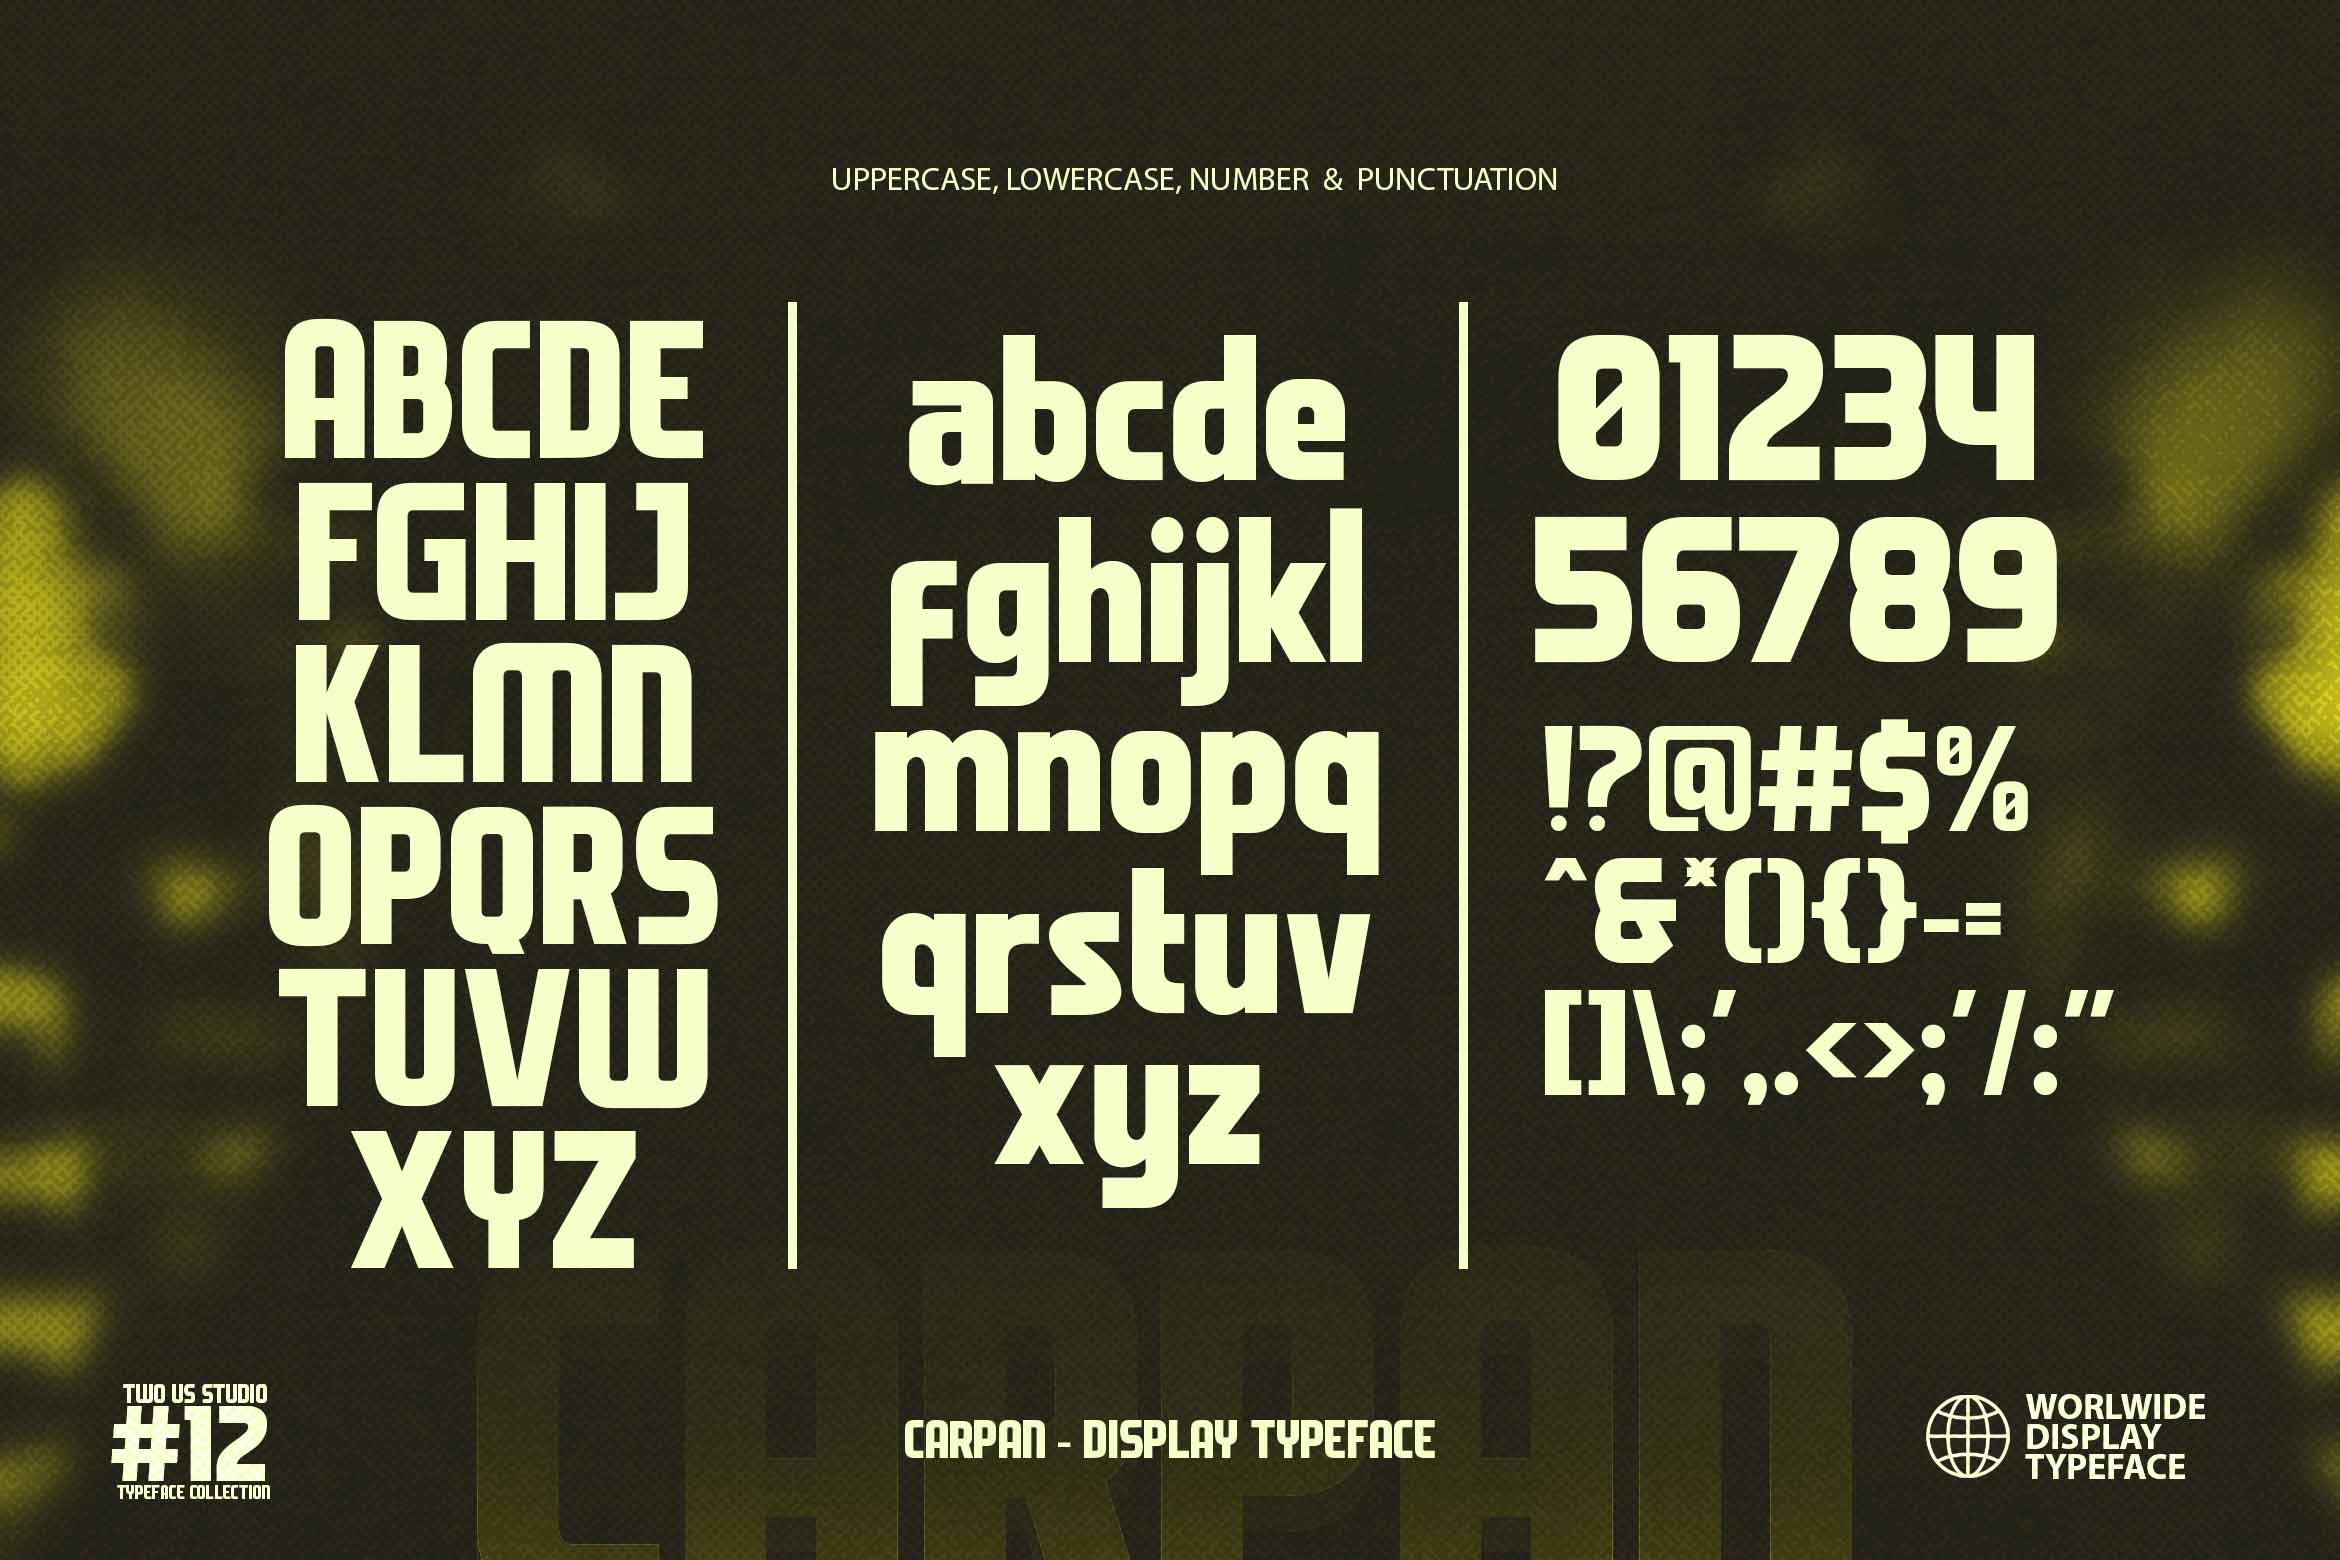 Image with alphabet and numbers demonstrating the beauty of the font on an acidic background.